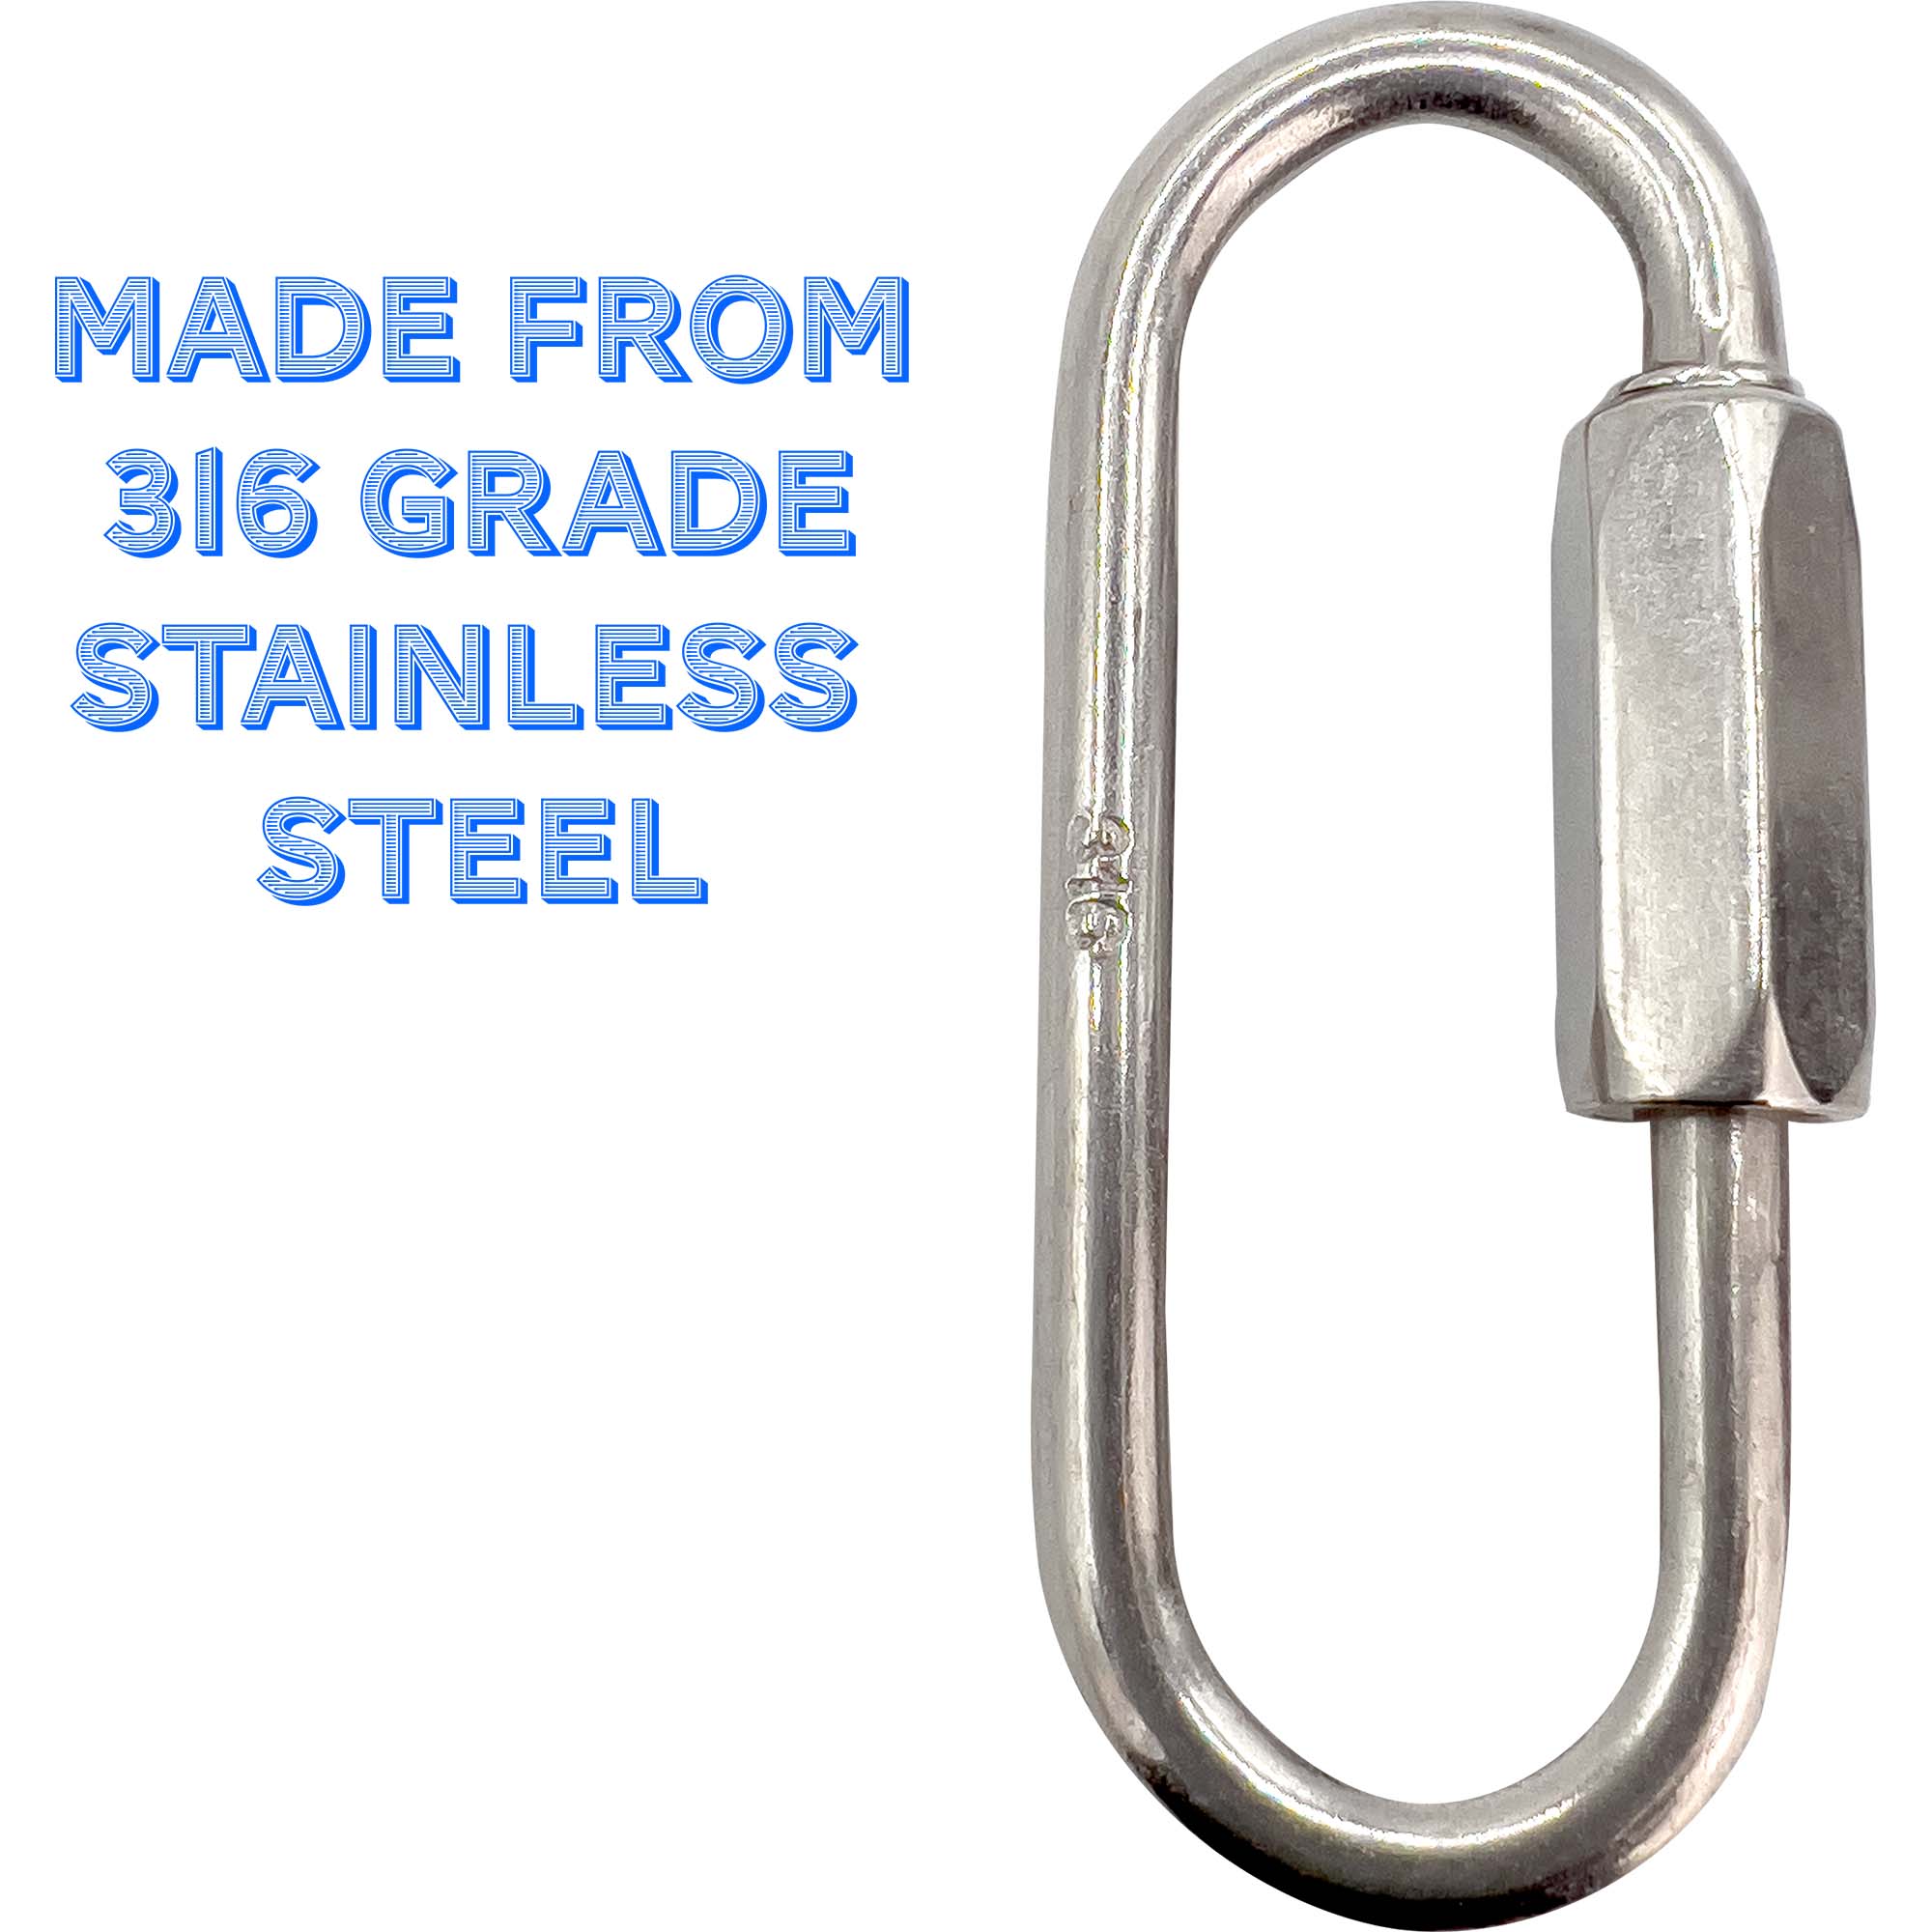 7004 Stainless Steel 2.5 Inch Large Toy Quick Link